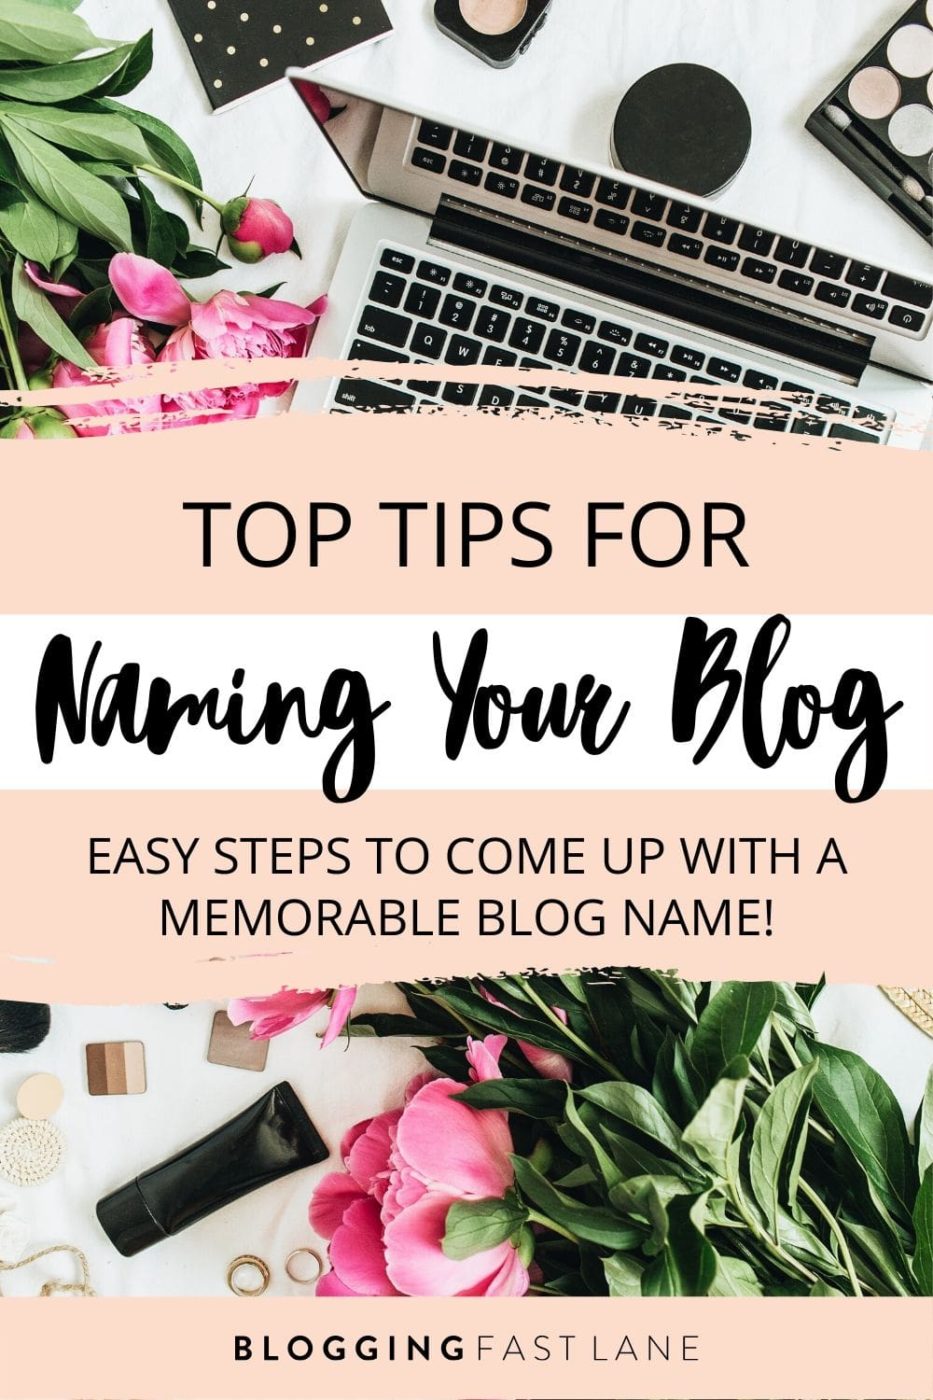 How to Name Your Blog | Stuck on coming up with a name for your blog? Click here to read our article with suggestions on how to come up with the perfect blog name!